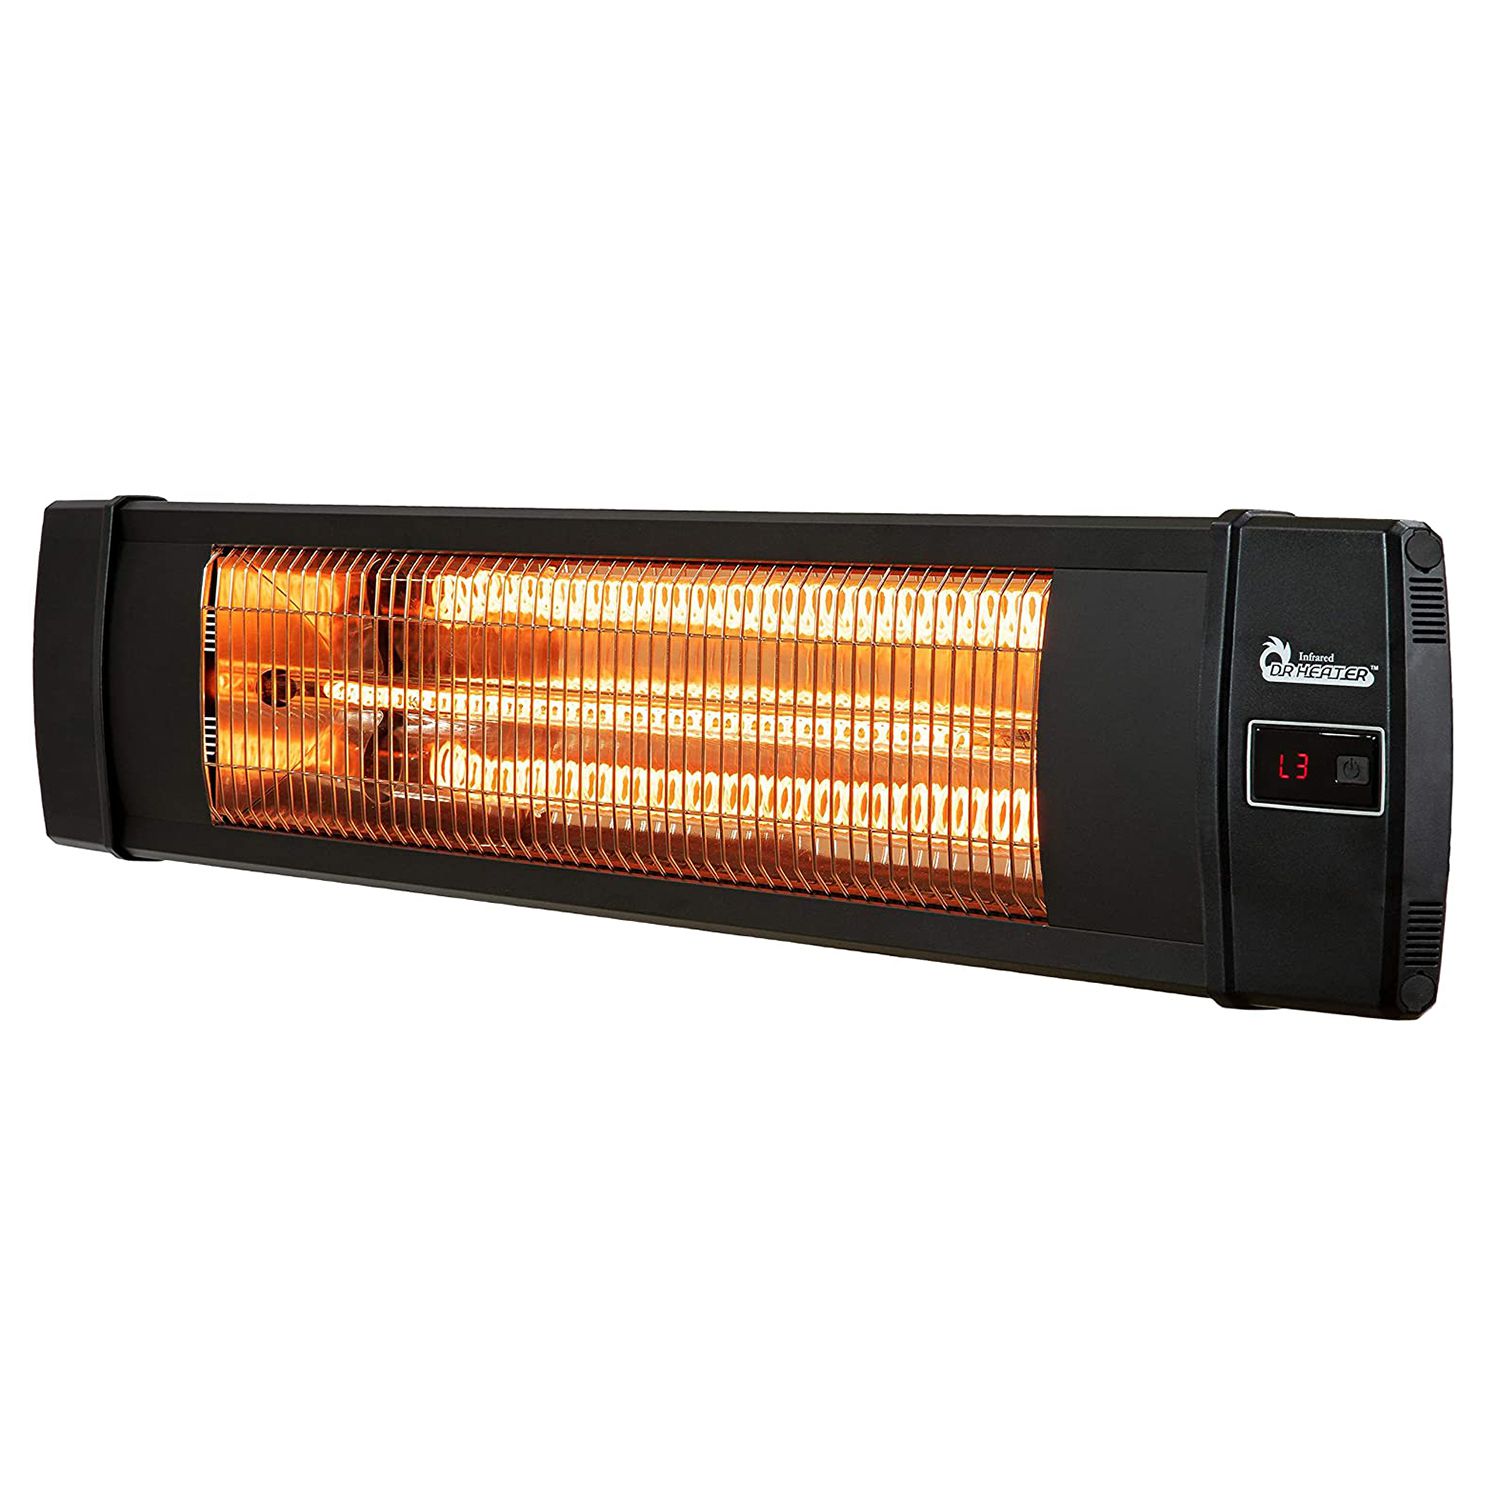 Electric Standing Patio Heater